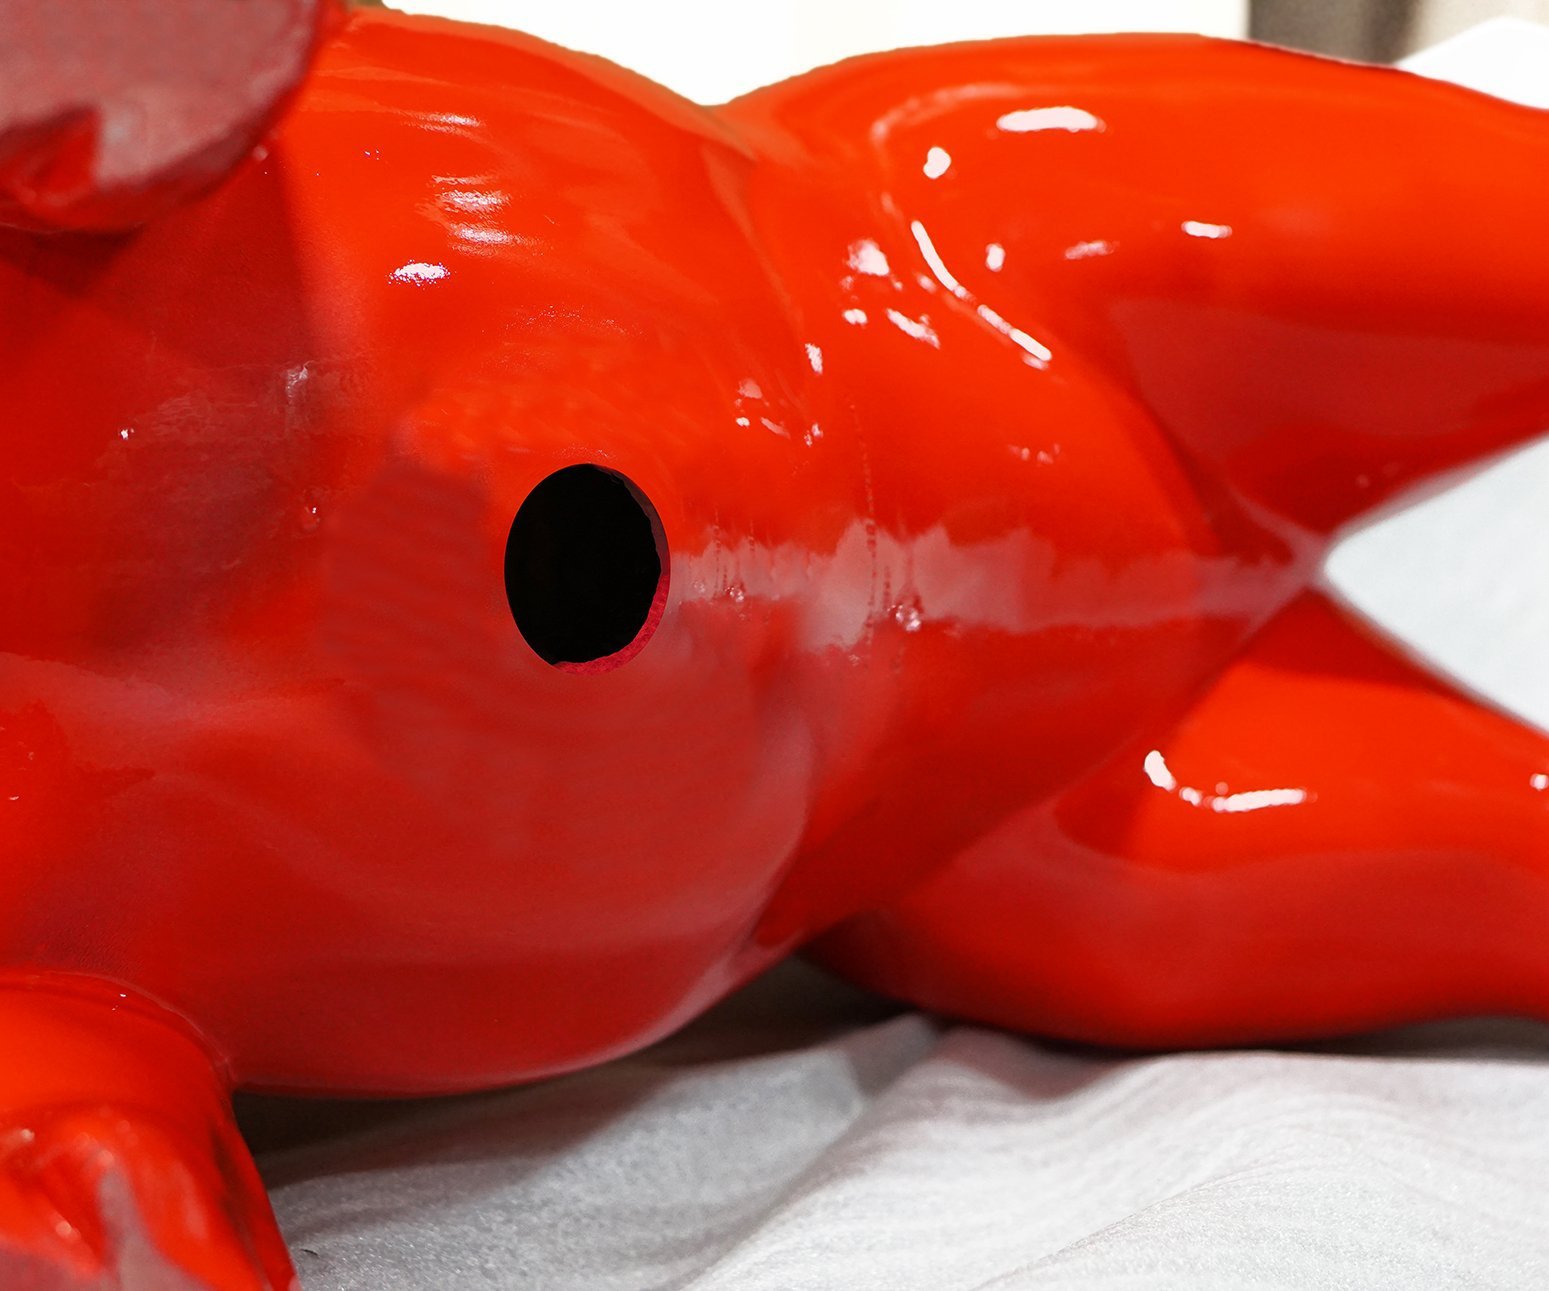 Underside of a red large fiberglass bulldog sculpture showing a hole in the belly.